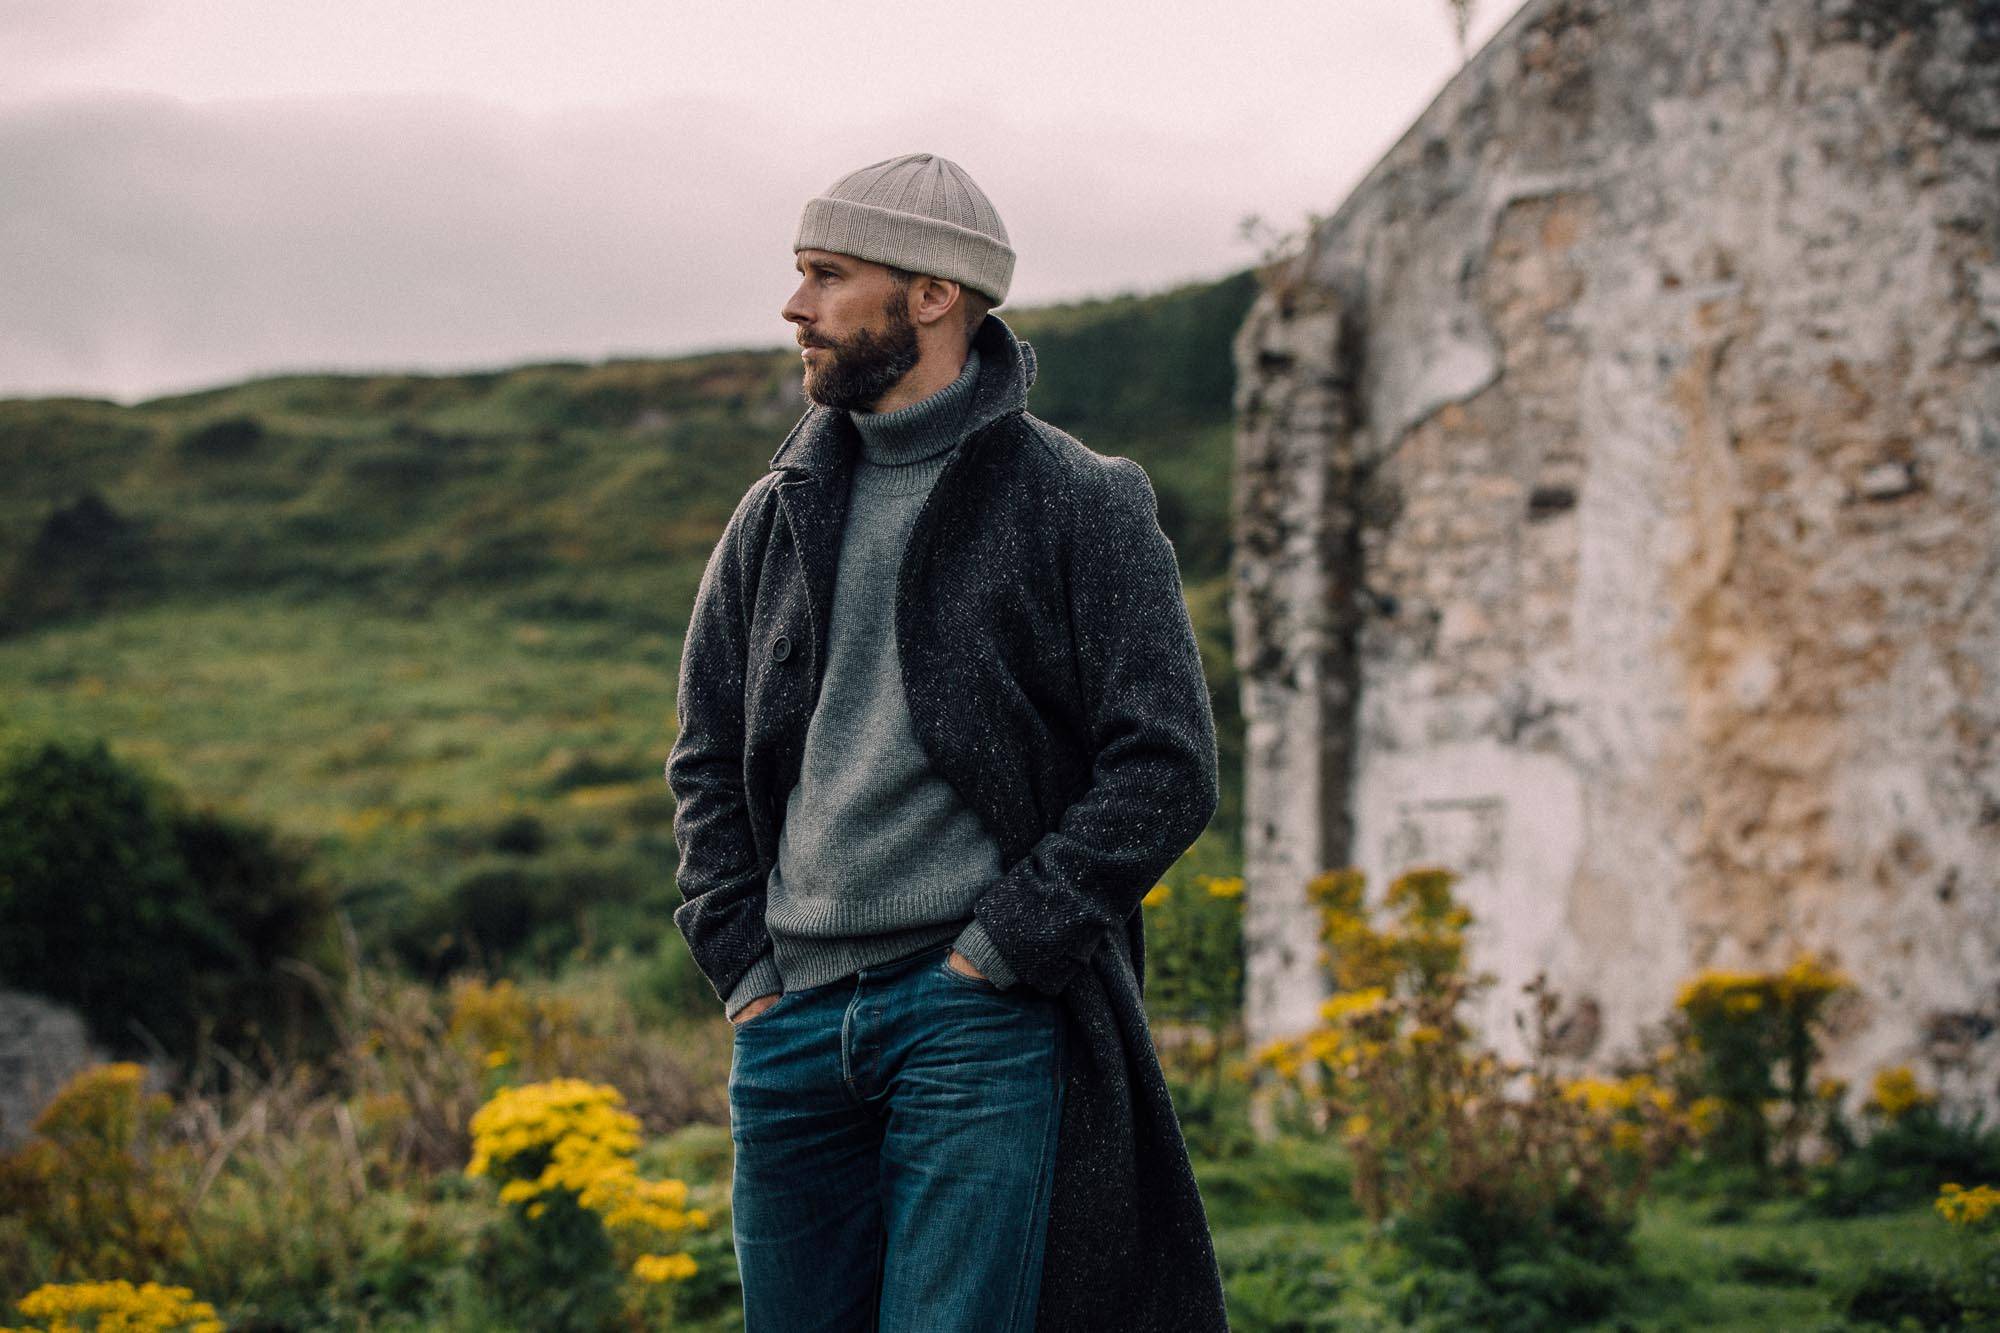 Introducing The New Permanent Style Donegal Overcoat – PrivateWhite V.C.